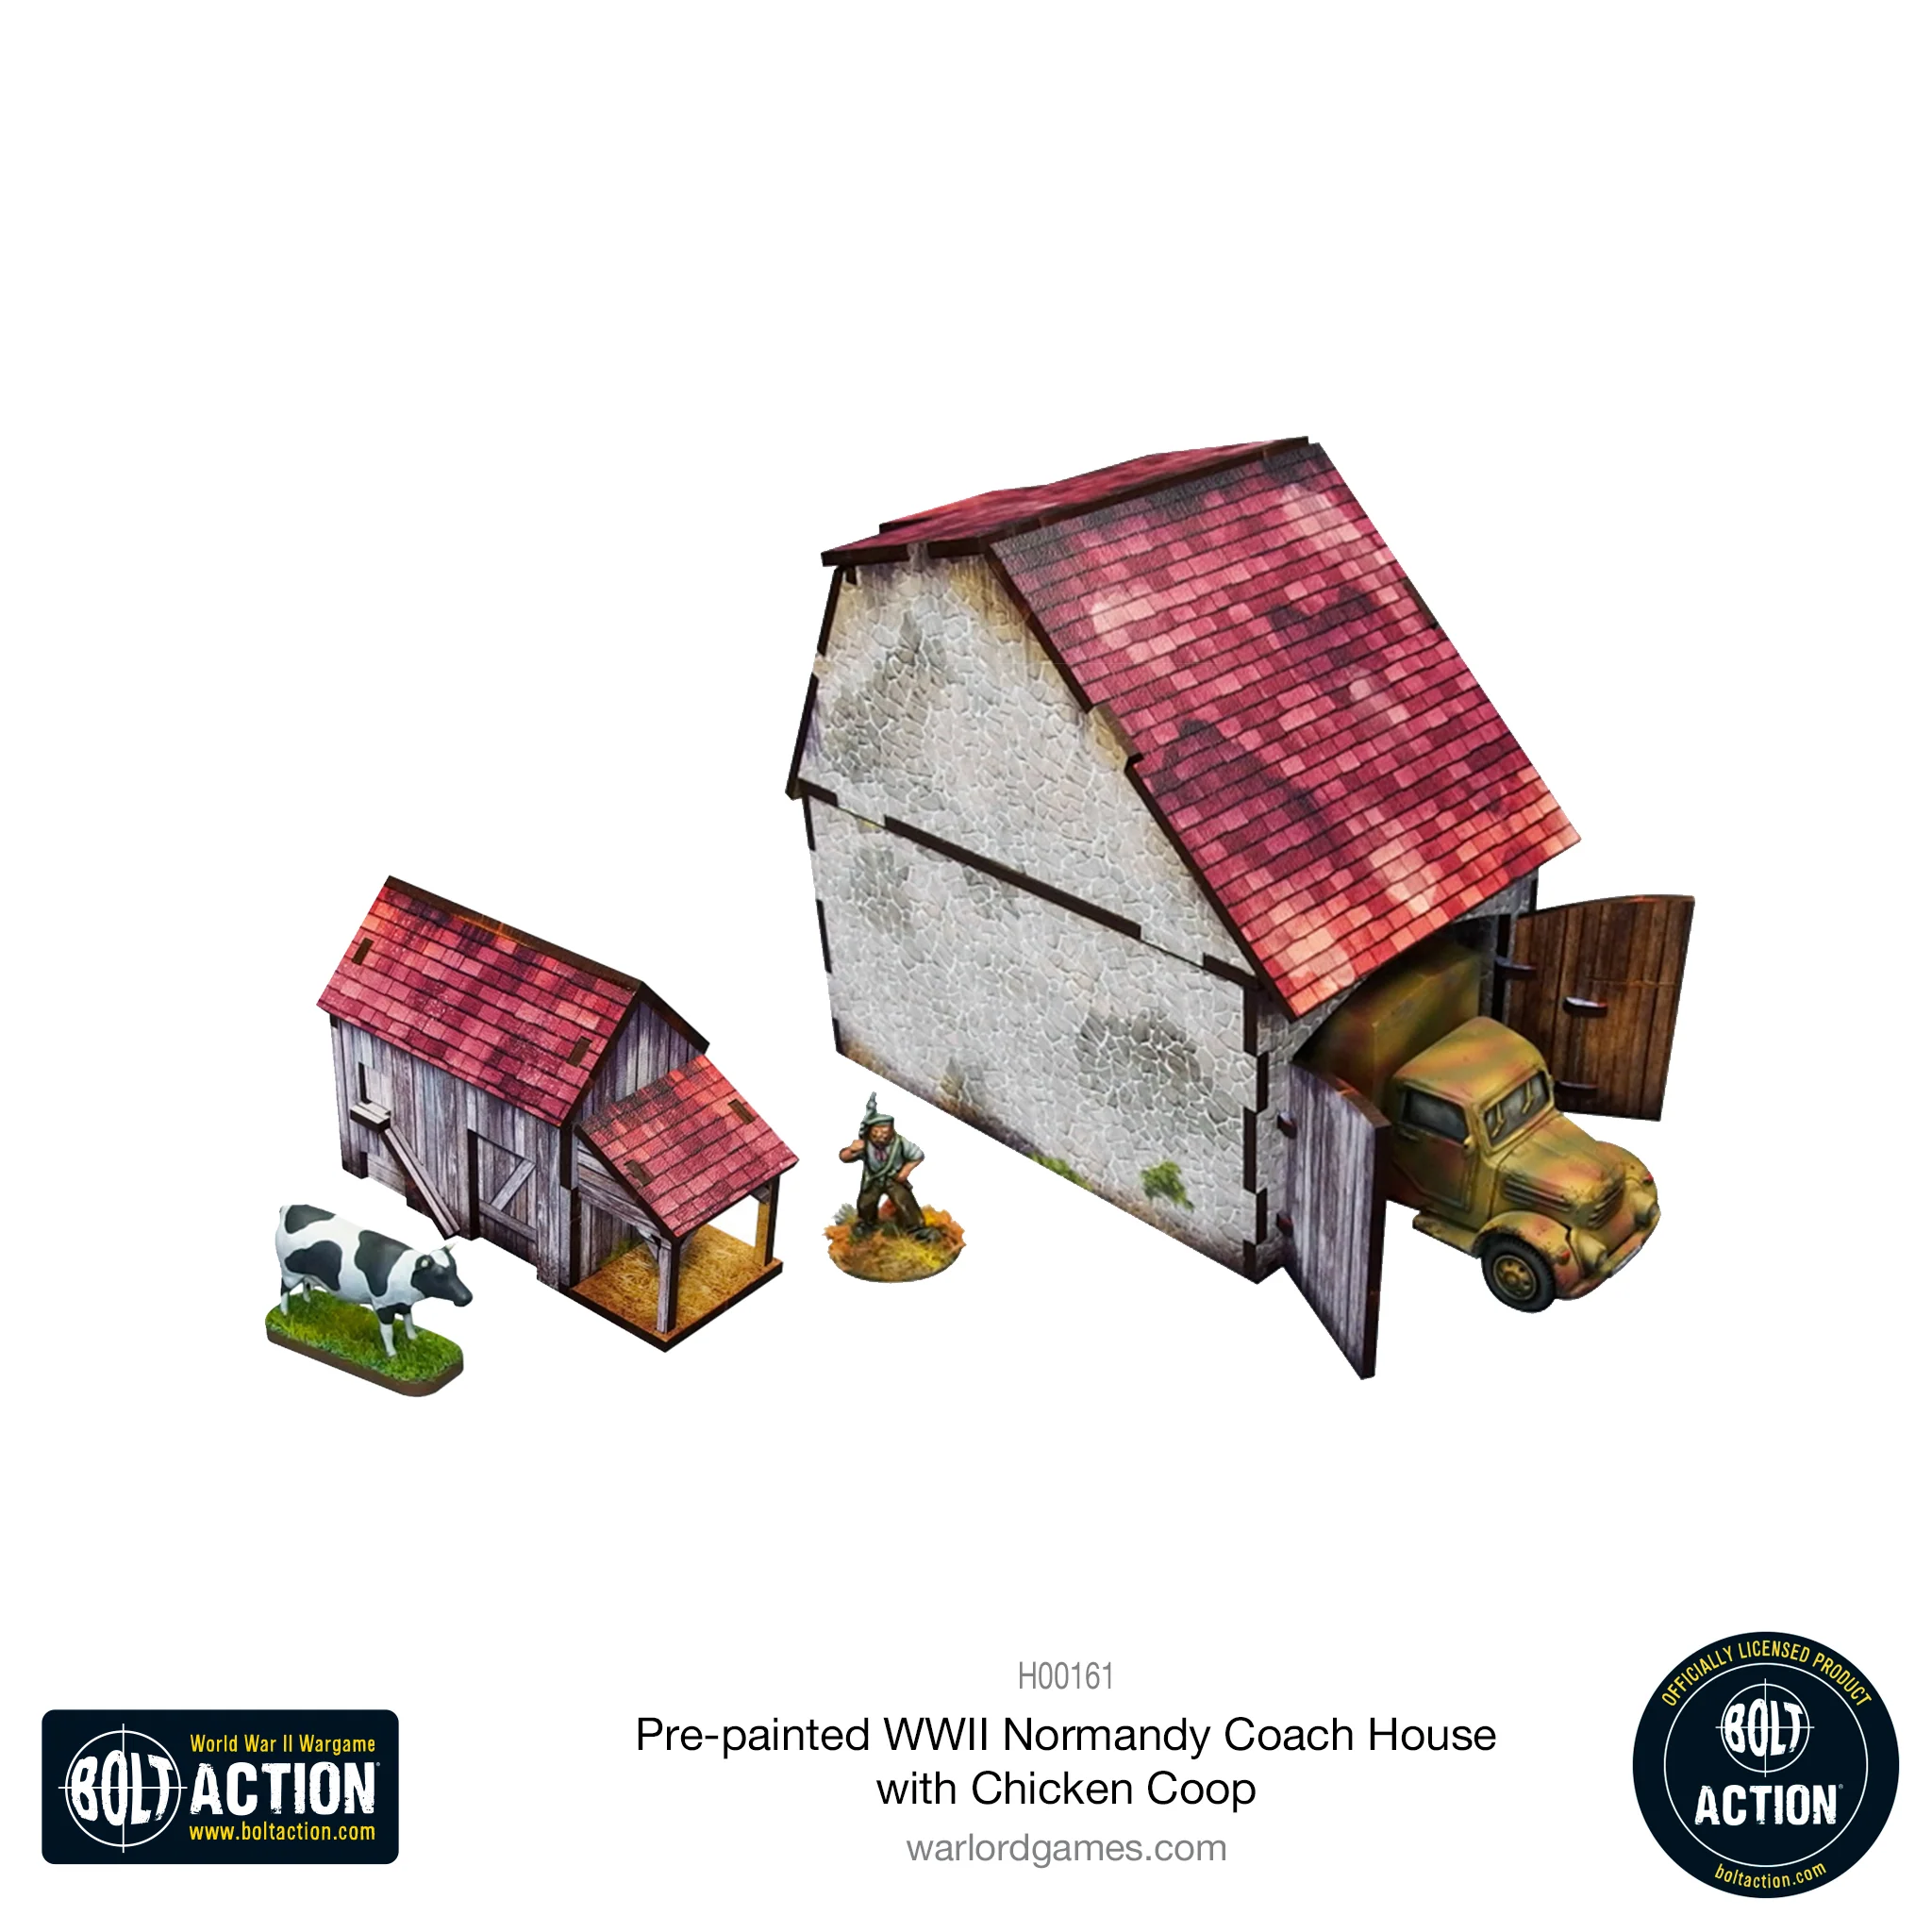 Bolt Action: Pre-Painted WWII Normandy Coach House With Chicken Coop-1711116713-GhlWK.webp